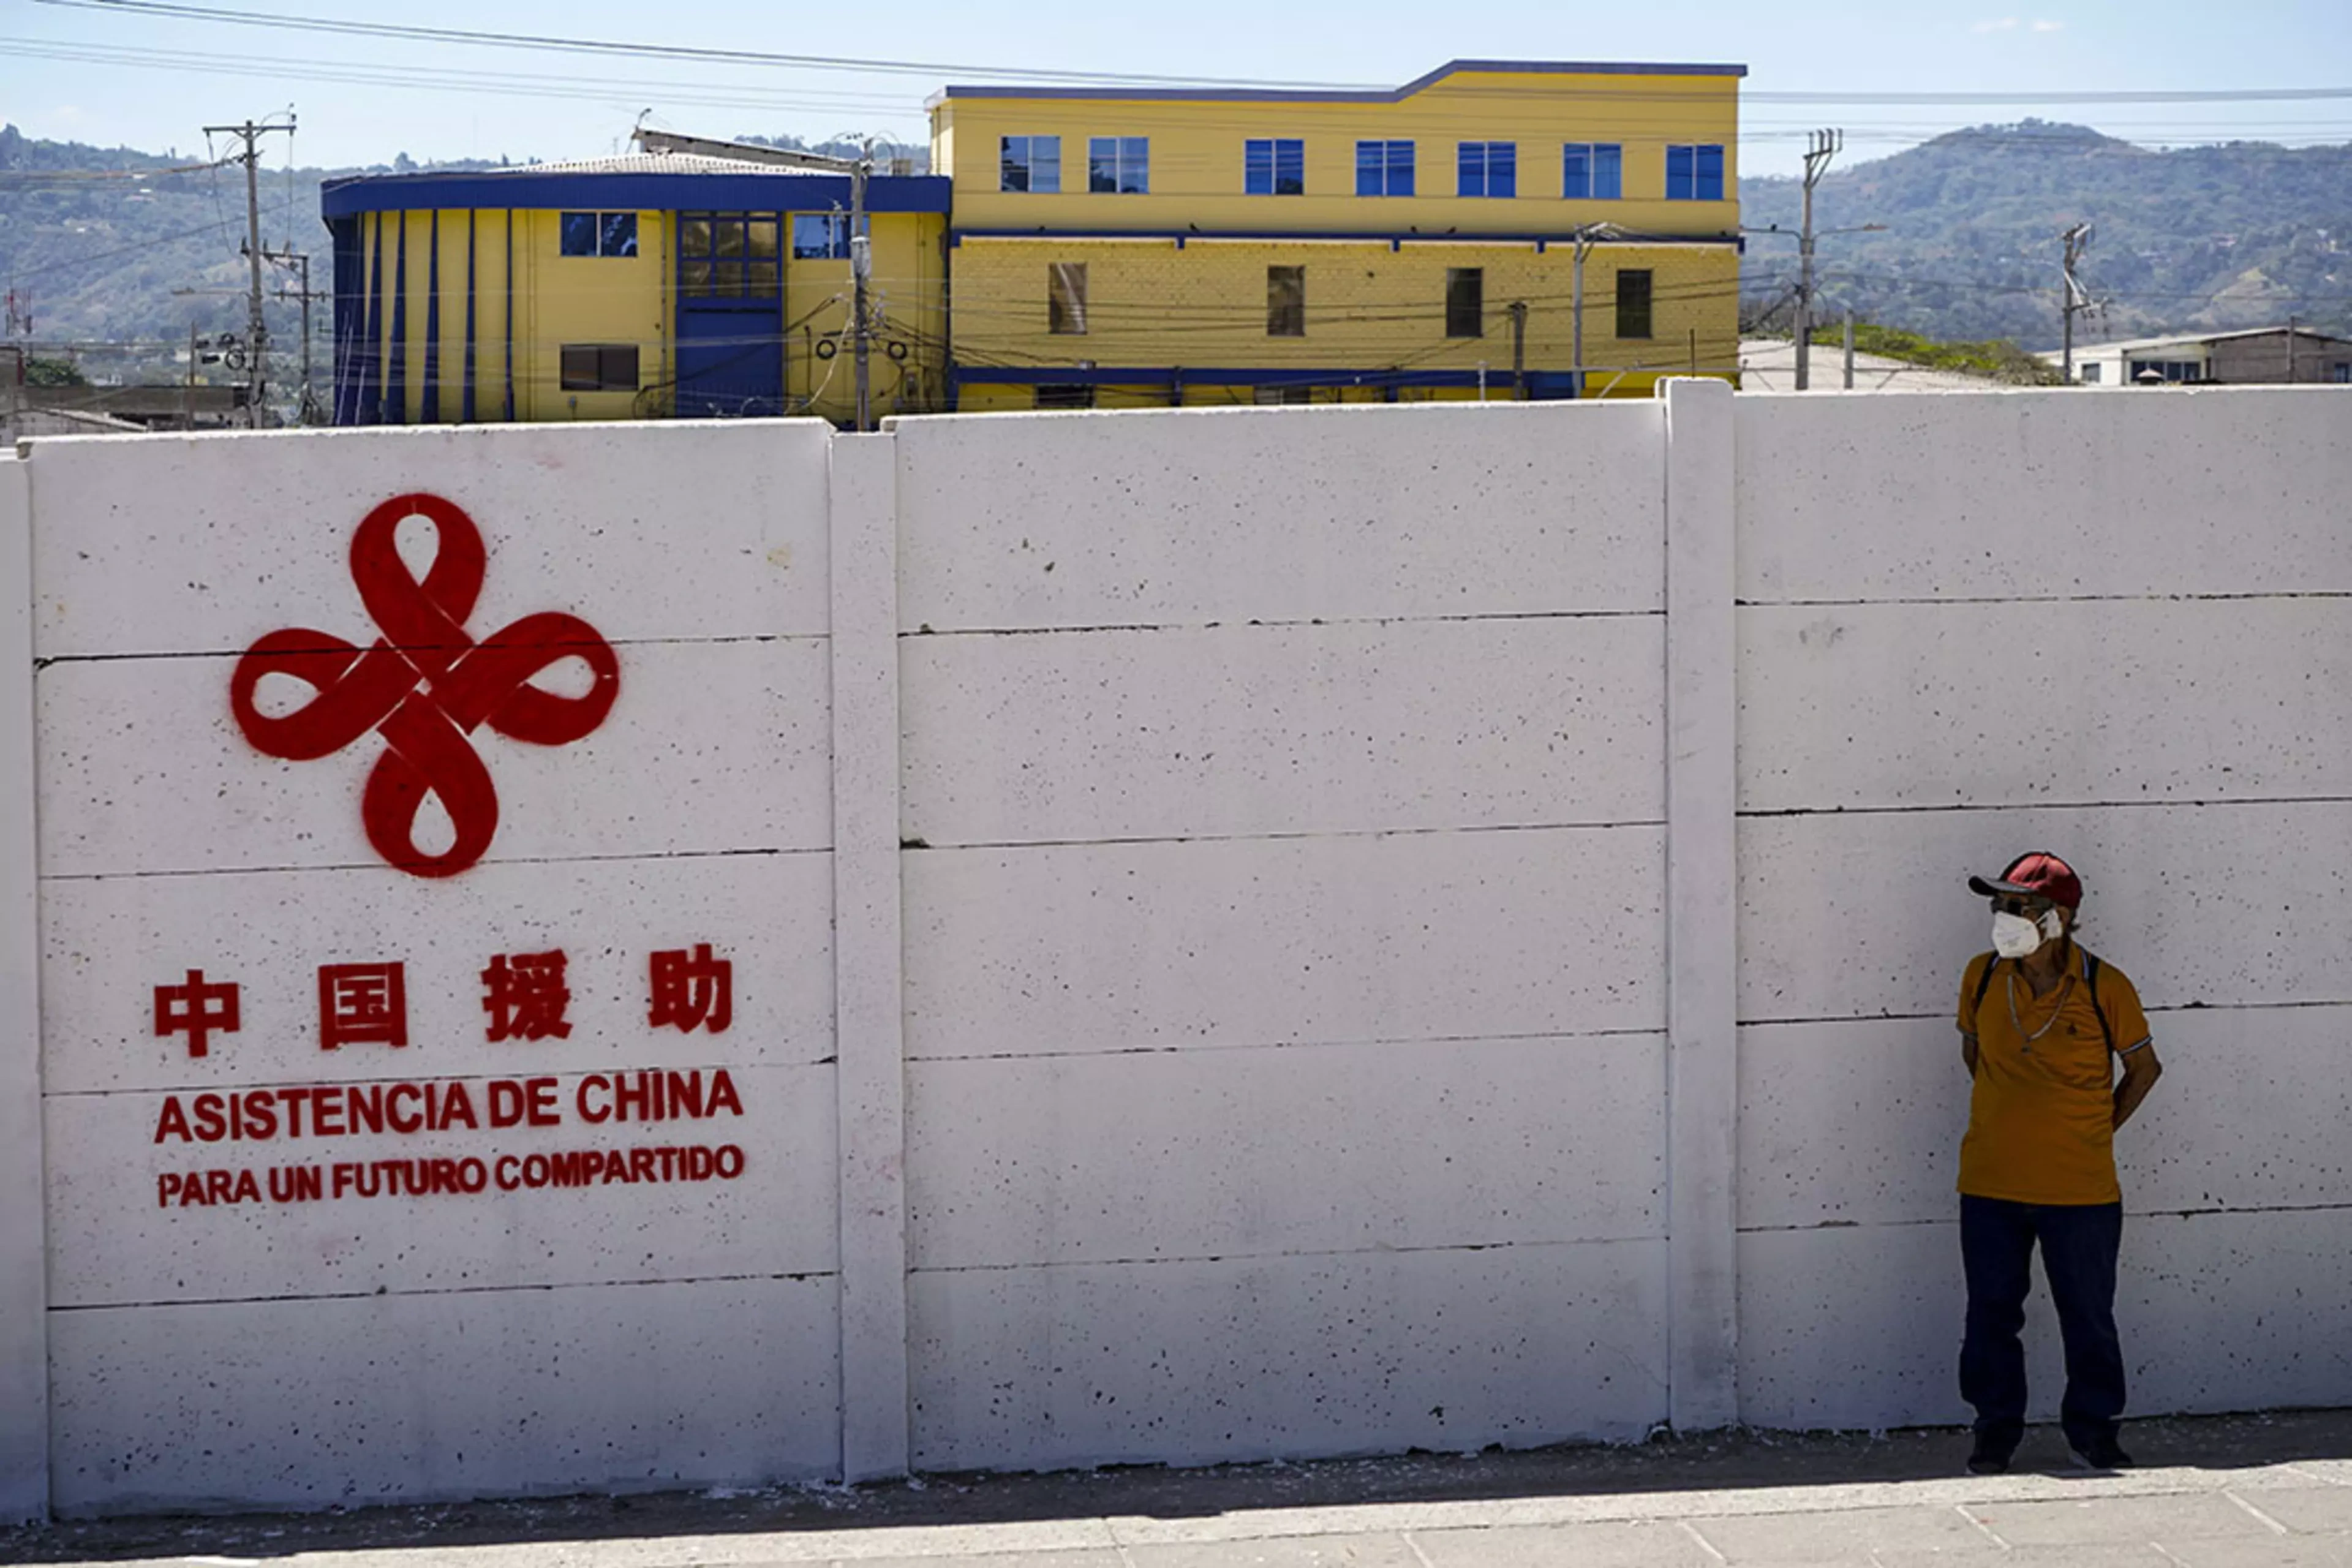 China is helping to build a new national library in San Salvador, El Salvador.